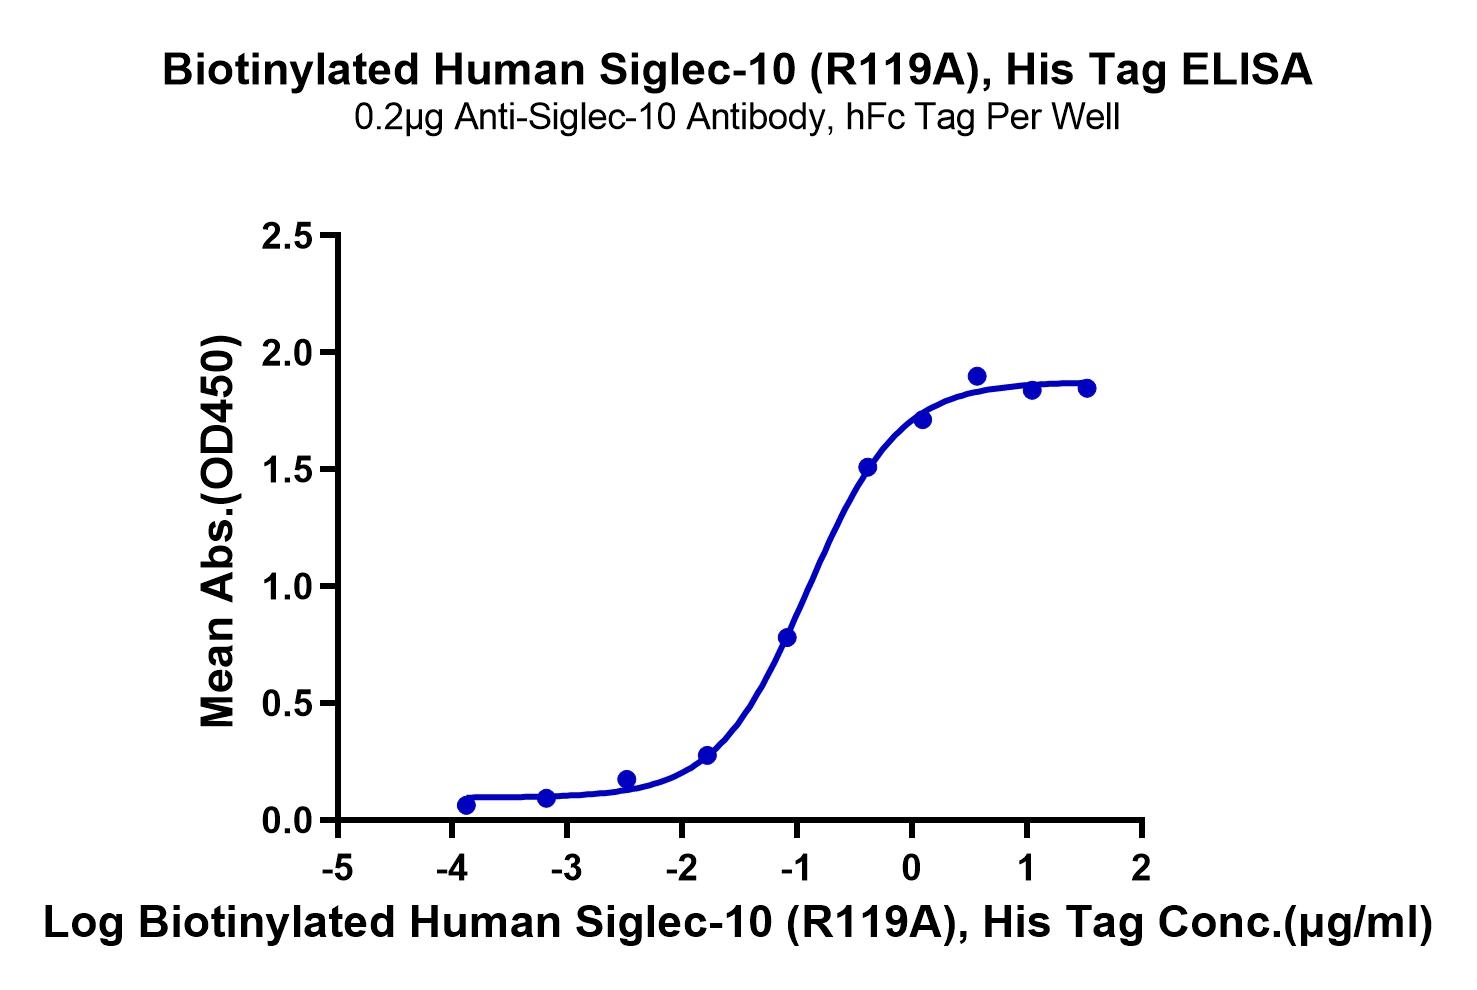 20230222115724 - Biotinylated Human Siglec-10 (R119A) Protein, Accession: Q96LC7